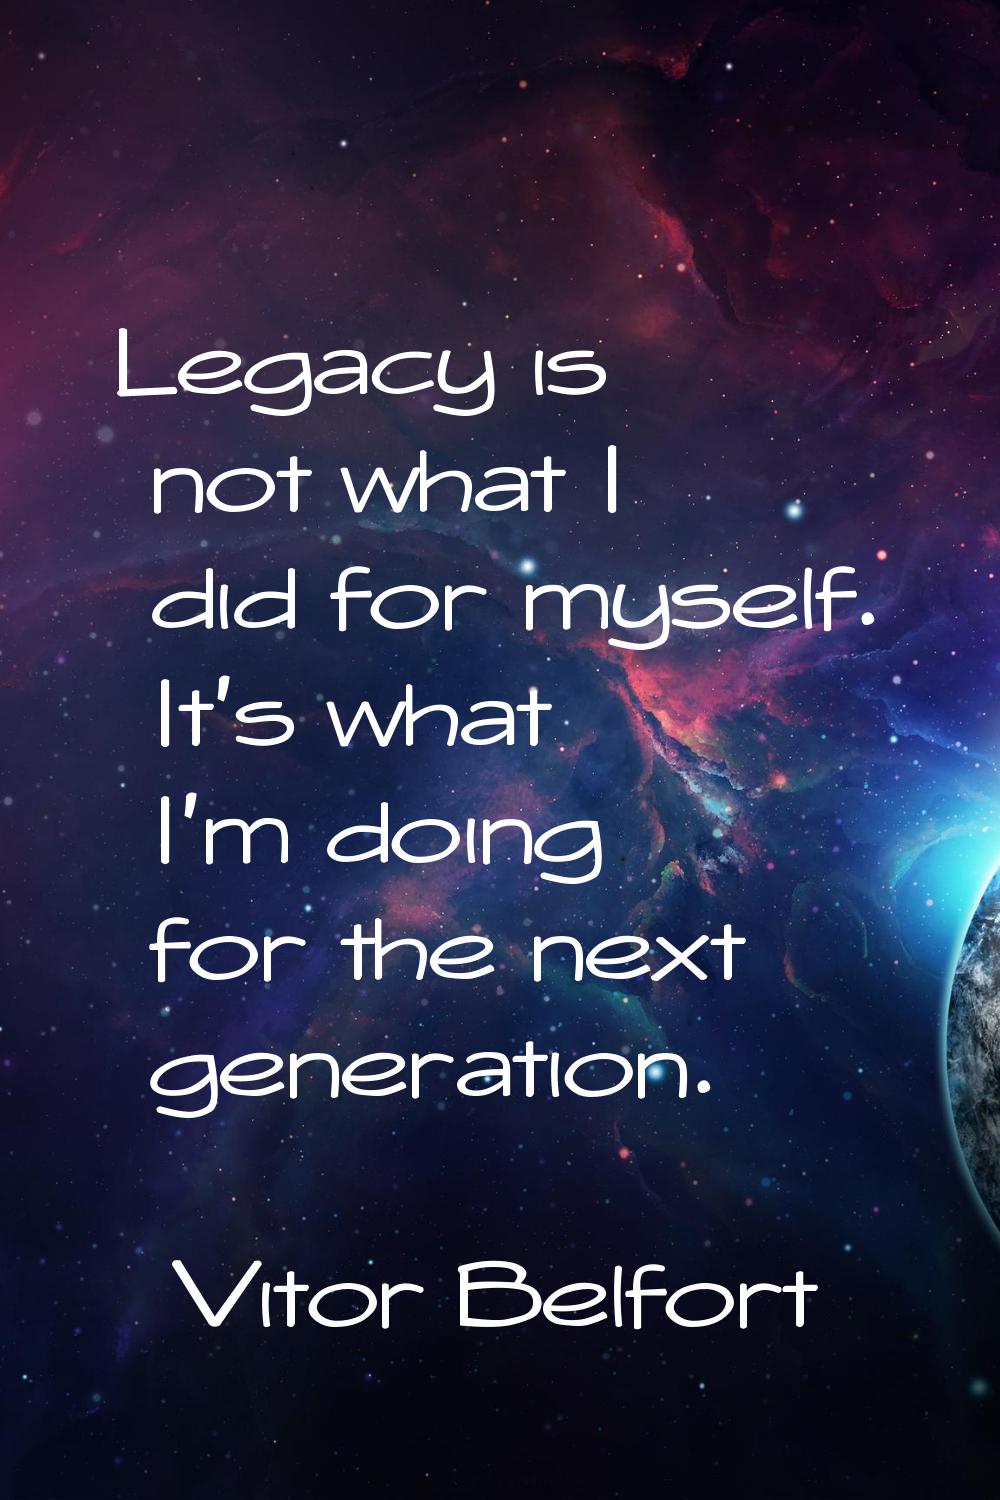 Legacy is not what I did for myself. It's what I'm doing for the next generation.